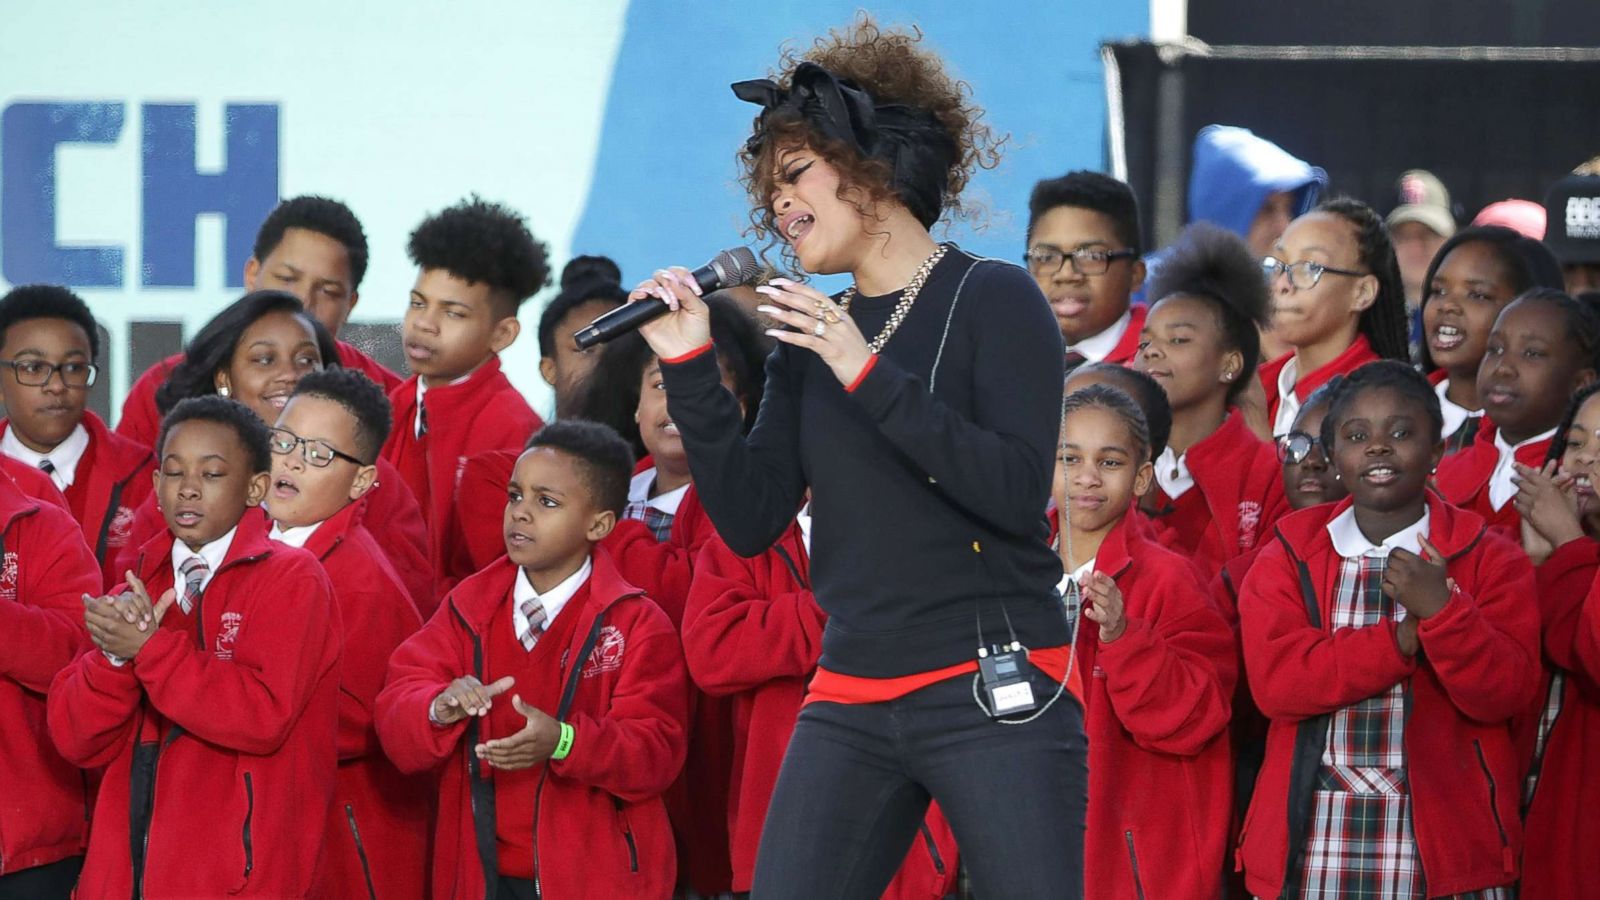 PHOTO: Andra Day performs "Rise Up" with members of the Cardinal Shehan School Choir during the March for Our Lives rally, on March 24, 2018 in Washington, D.C.